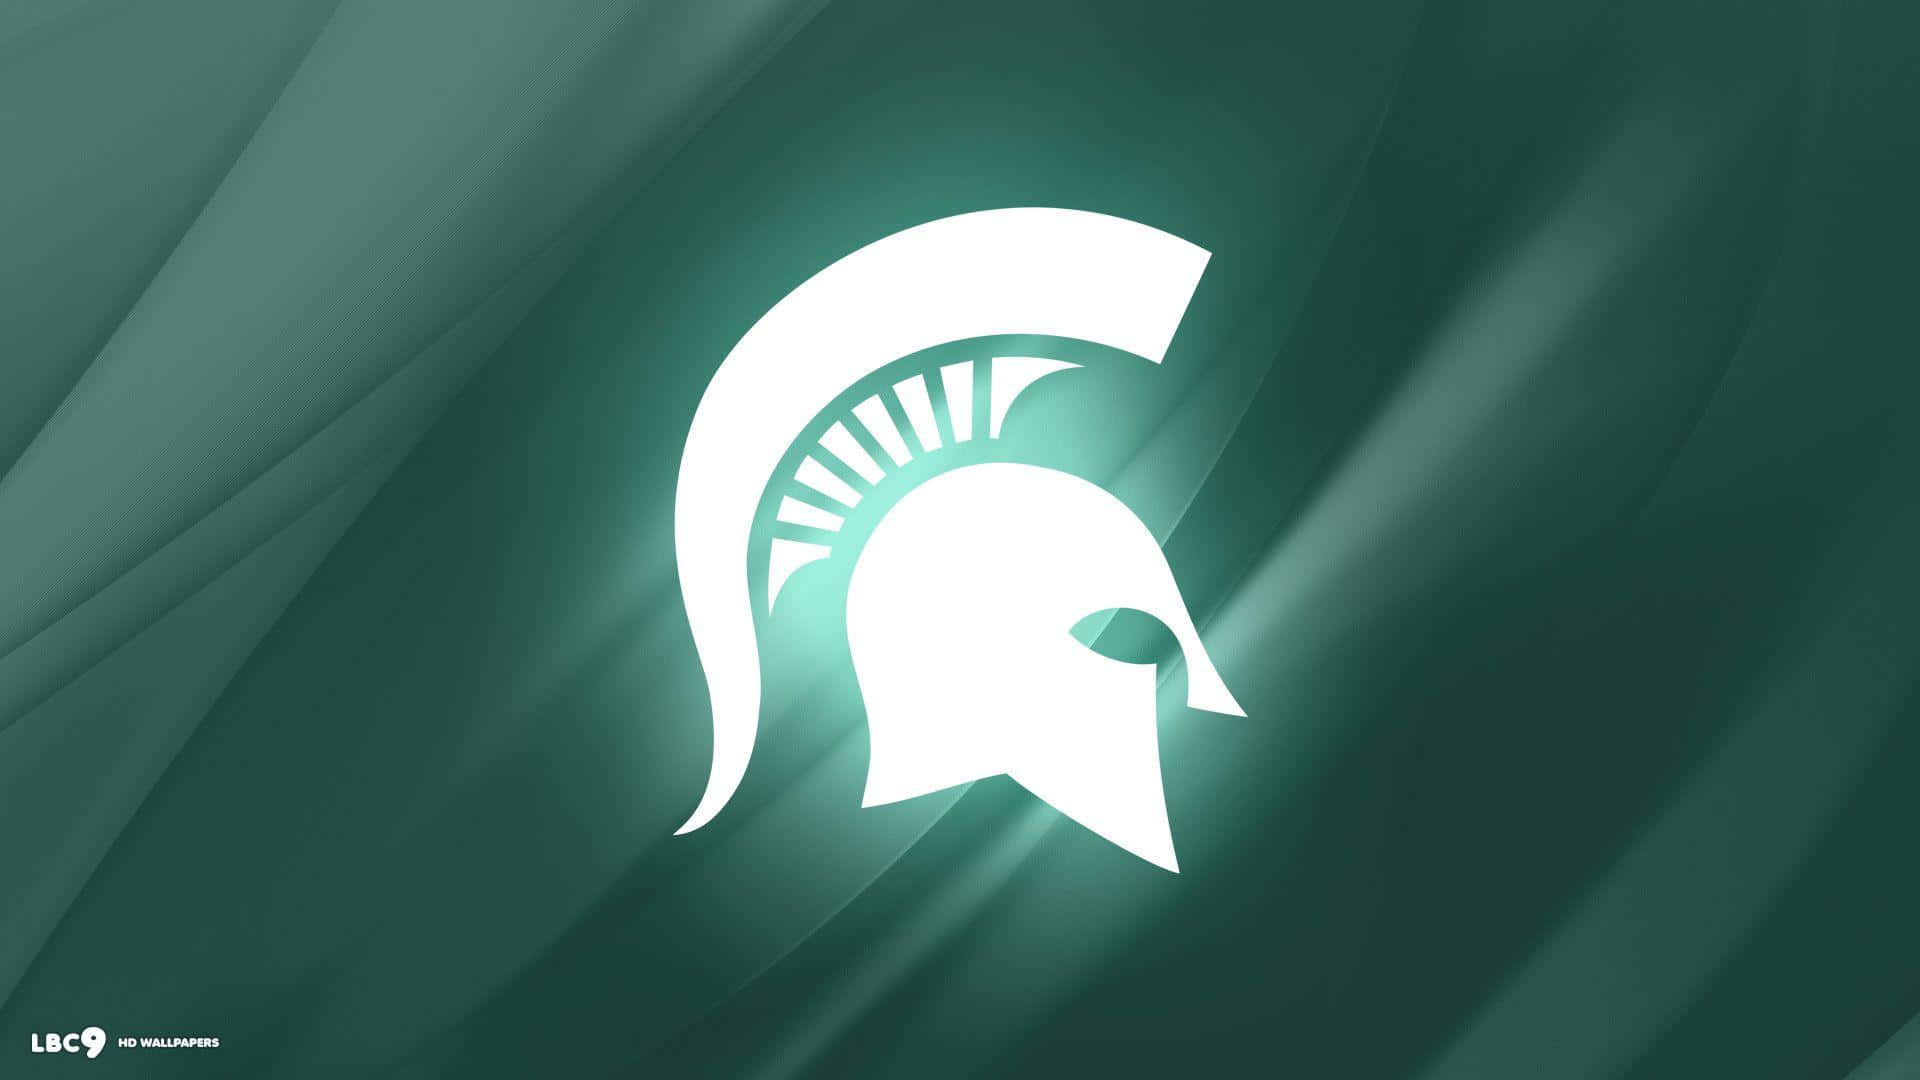 Michigan State Spartans Logo On A Green Background Background